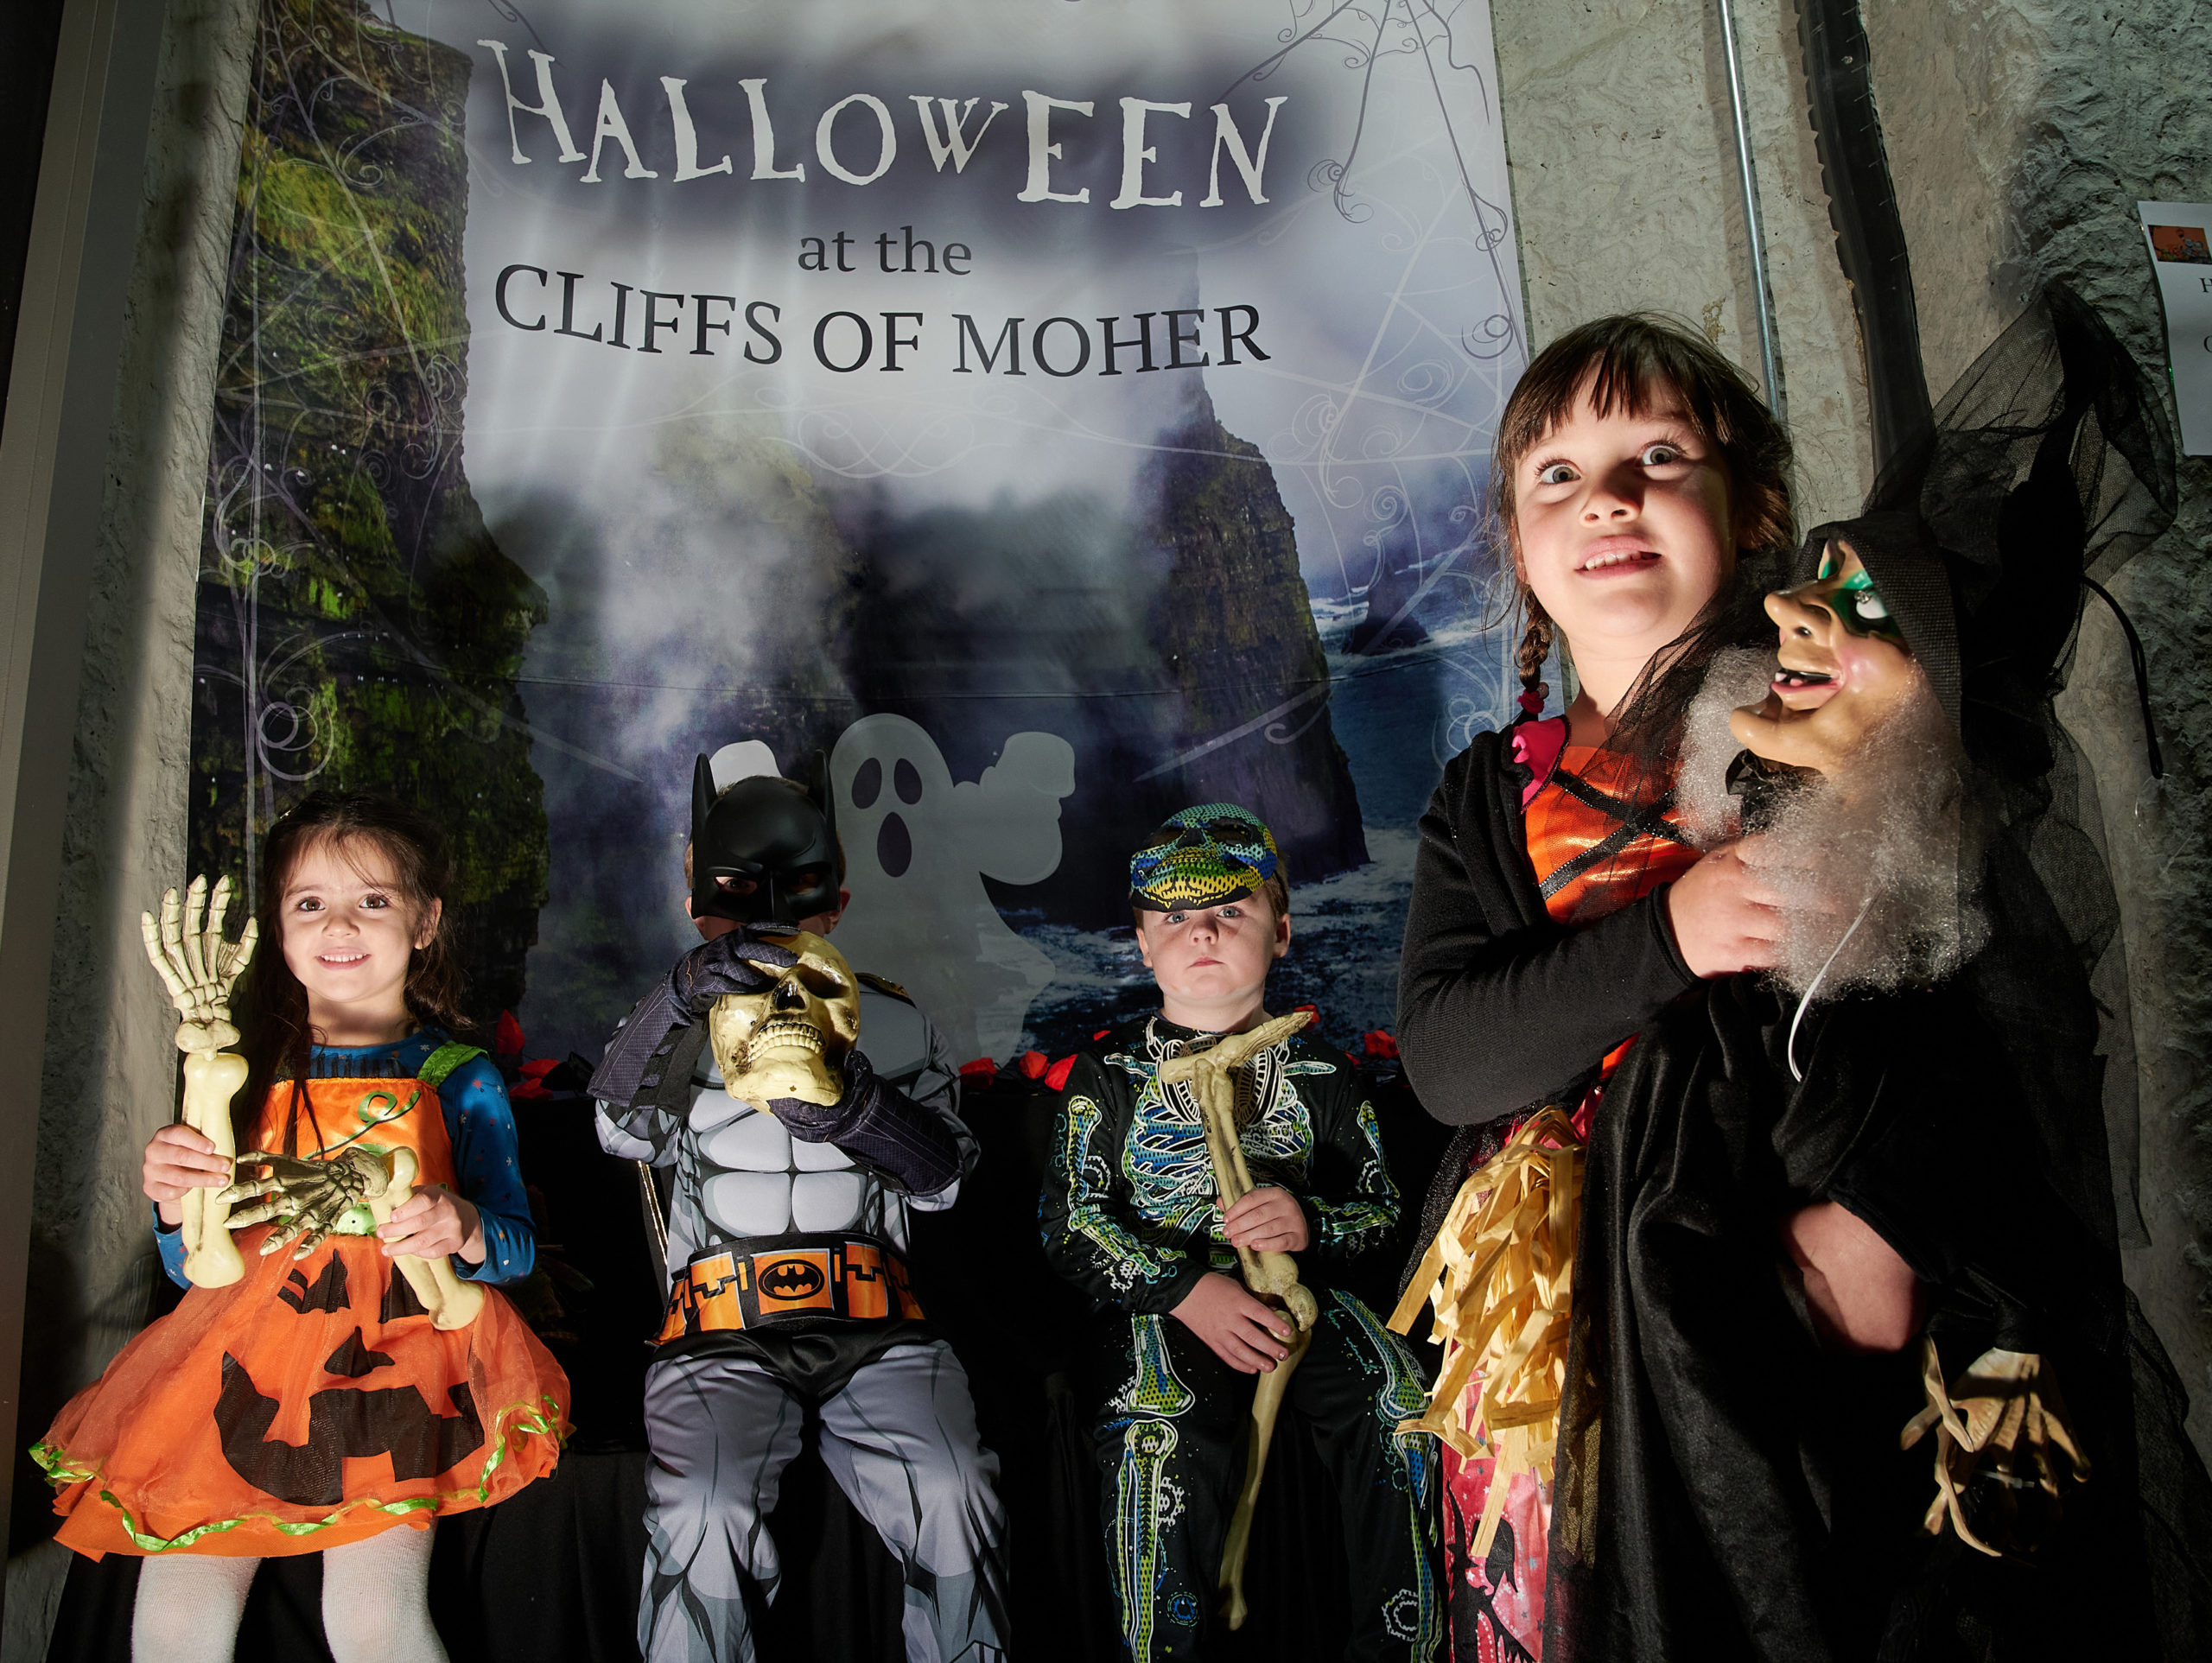 Halloween: Its spooky season at the Cliffs of Moher